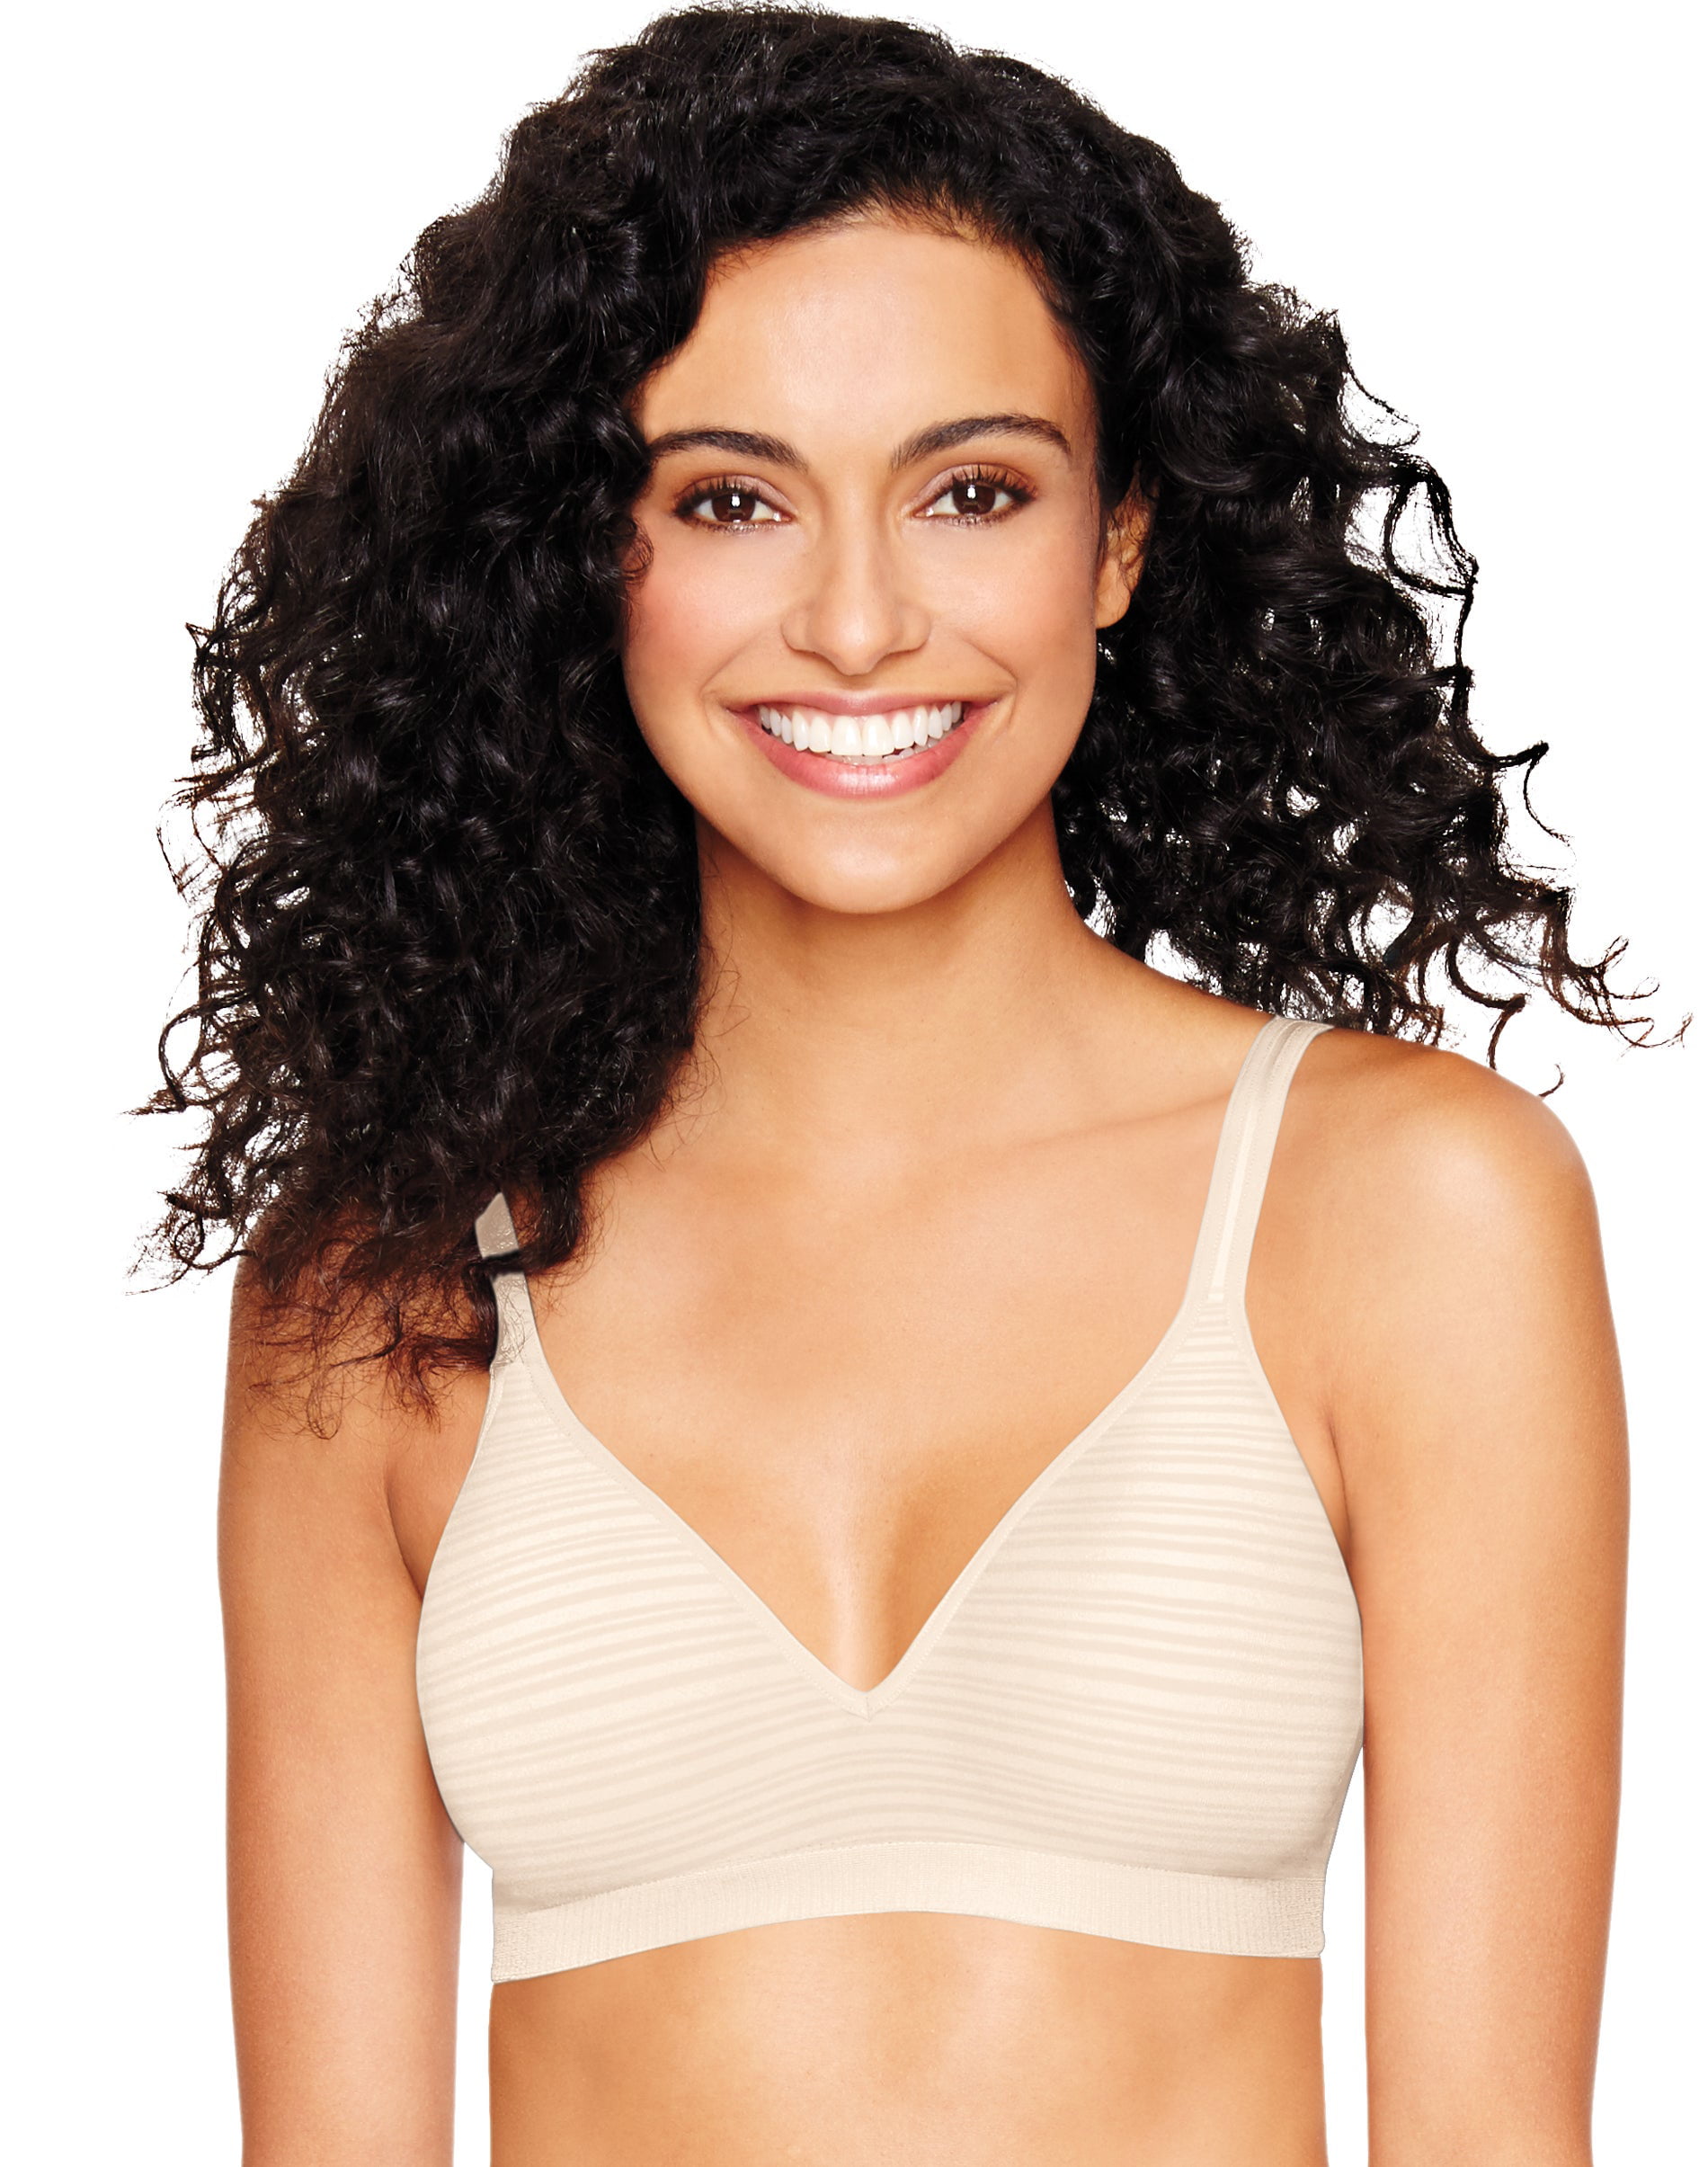 Hanes Barely There Womens Ultimate Perfect Coverage WireFree 4546